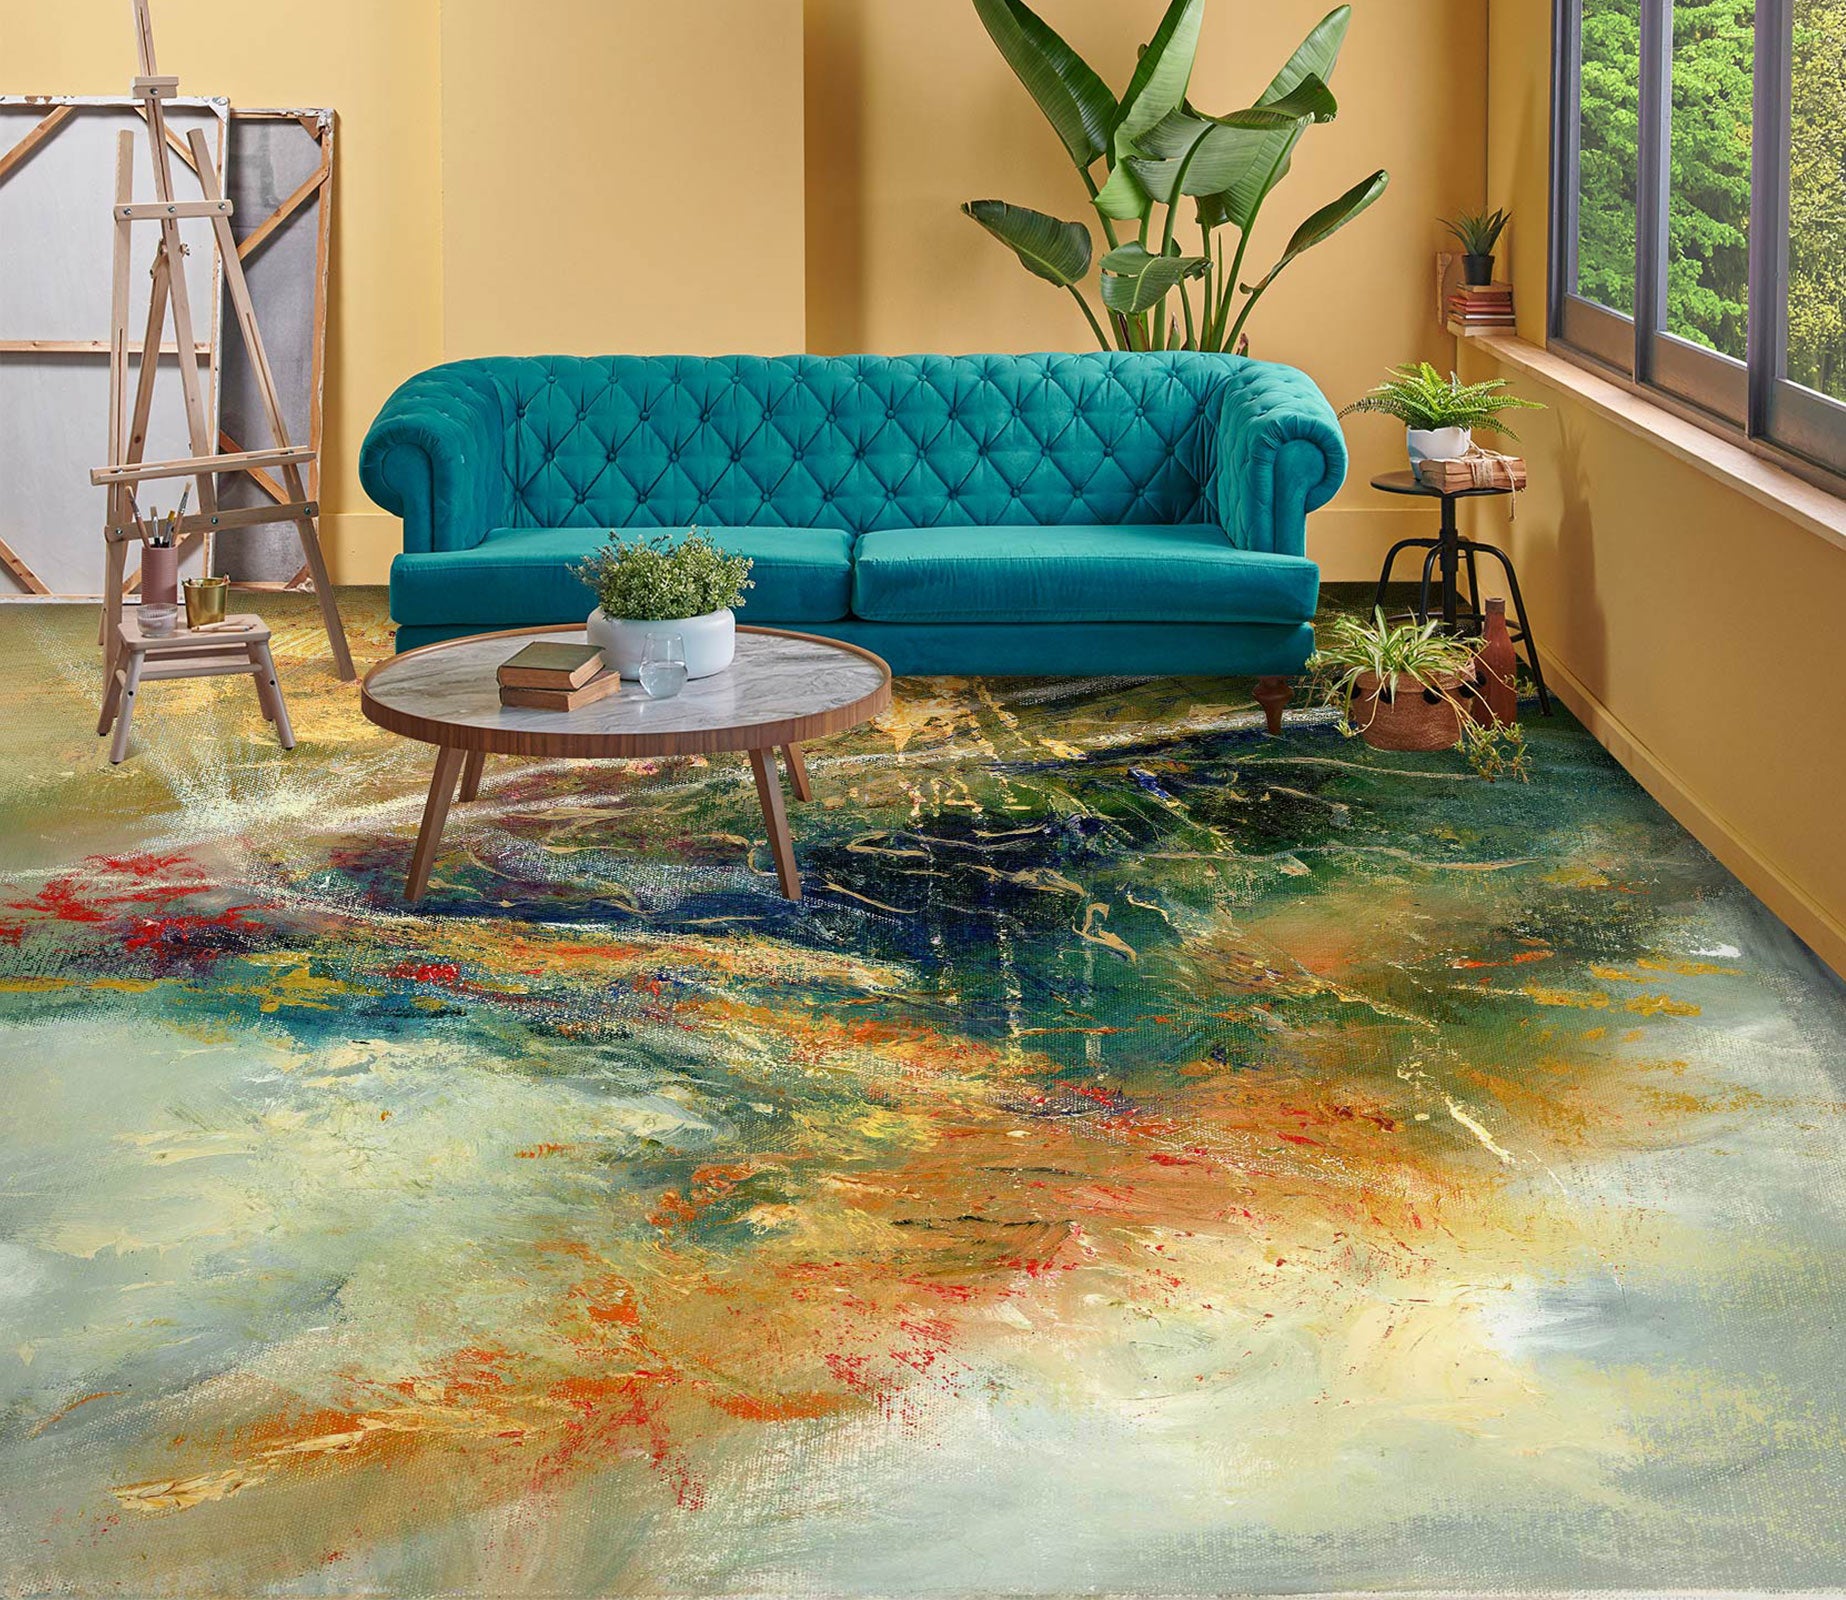 3D Green Pattern Texture 99175 Anne Farrall Doyle Floor Mural  Wallpaper Murals Self-Adhesive Removable Print Epoxy